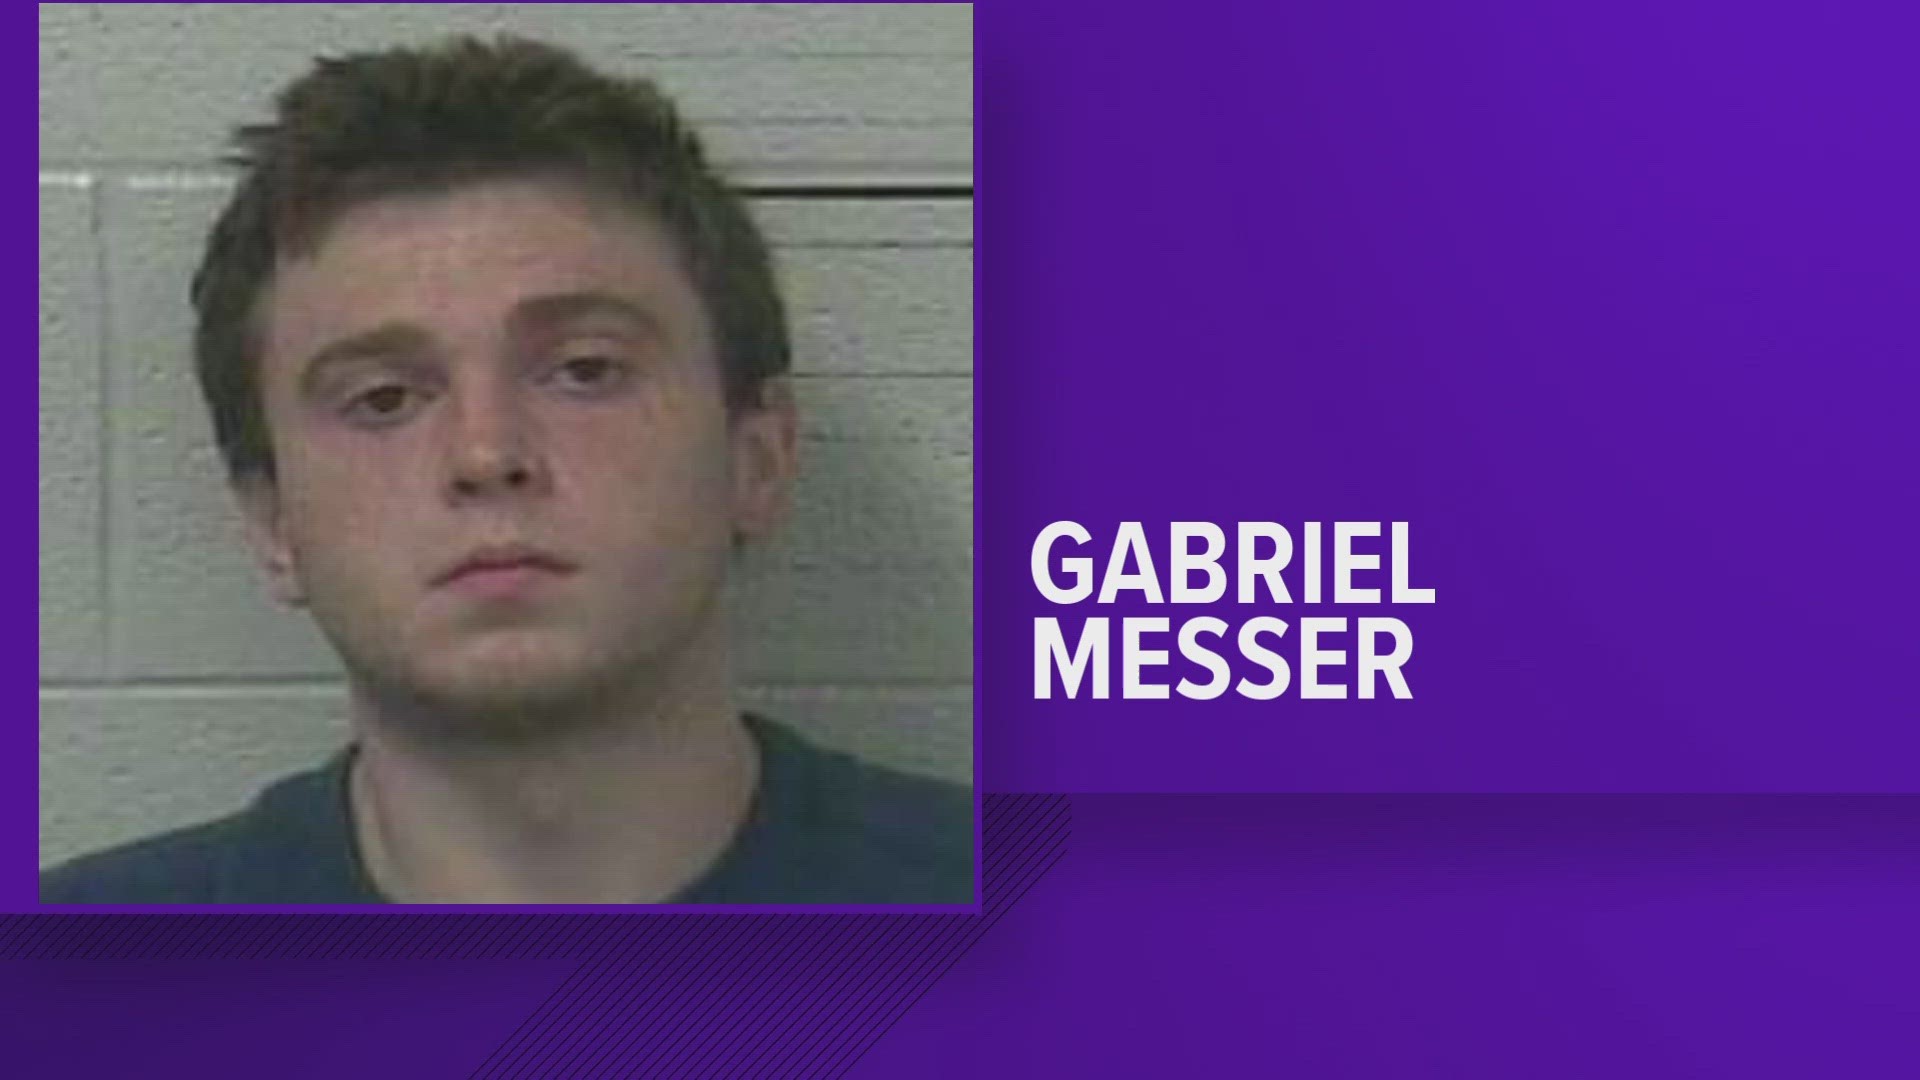 According to the deputies, Gabriel Messer of Barbourville and a juvenile filmed themselves torturing a cat and posted the video online.